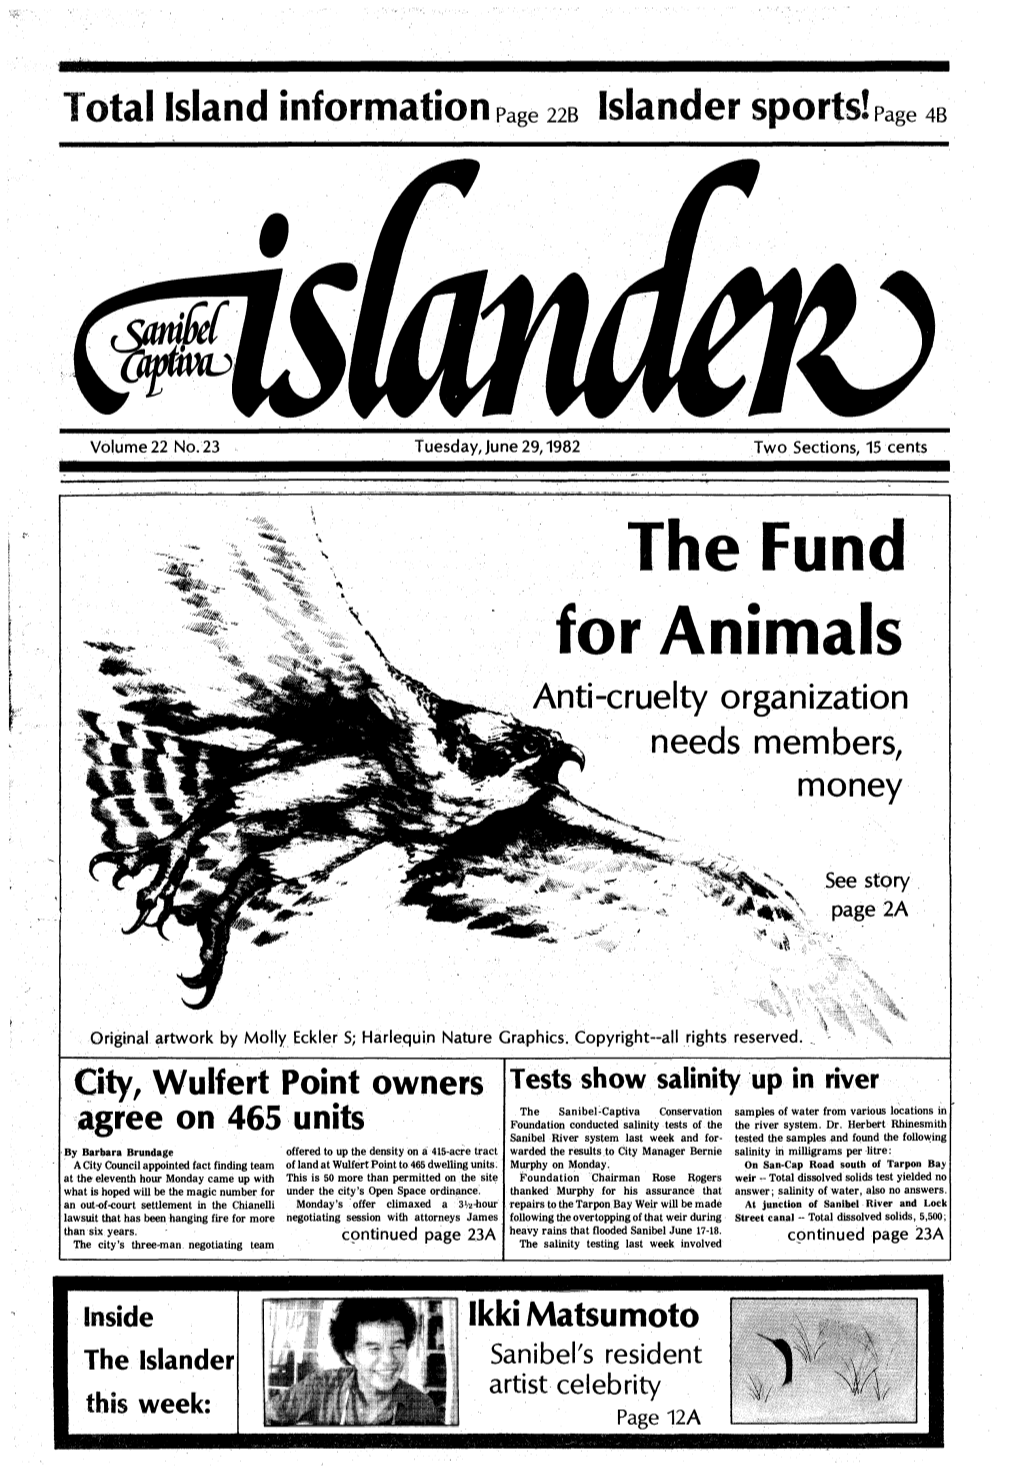 Ikki Matsumoto the Islander Sanibel's Resident Artist Celebrity This Week: Page 12A 2A Tuesday, June 29,1982 the ISLANDER A